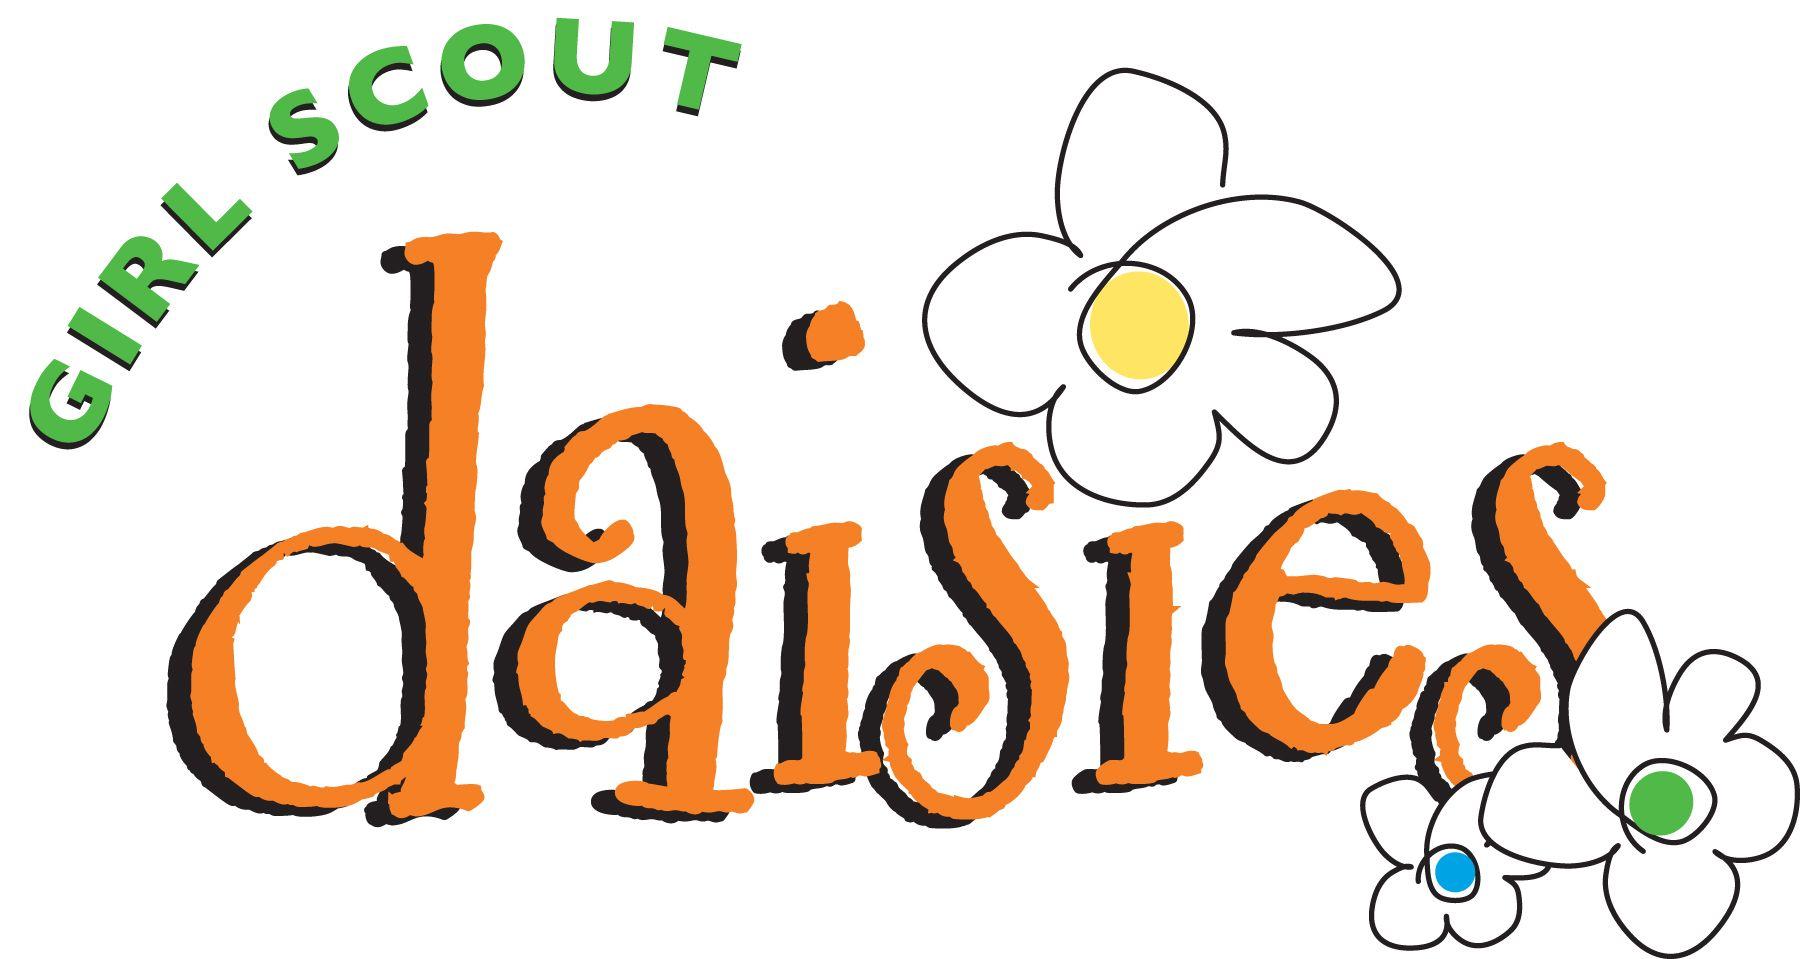 Daisy Scout Logo - Daisy Girl Scout Clip Art Images | Girl Scout Ideas | Girl scouts ...